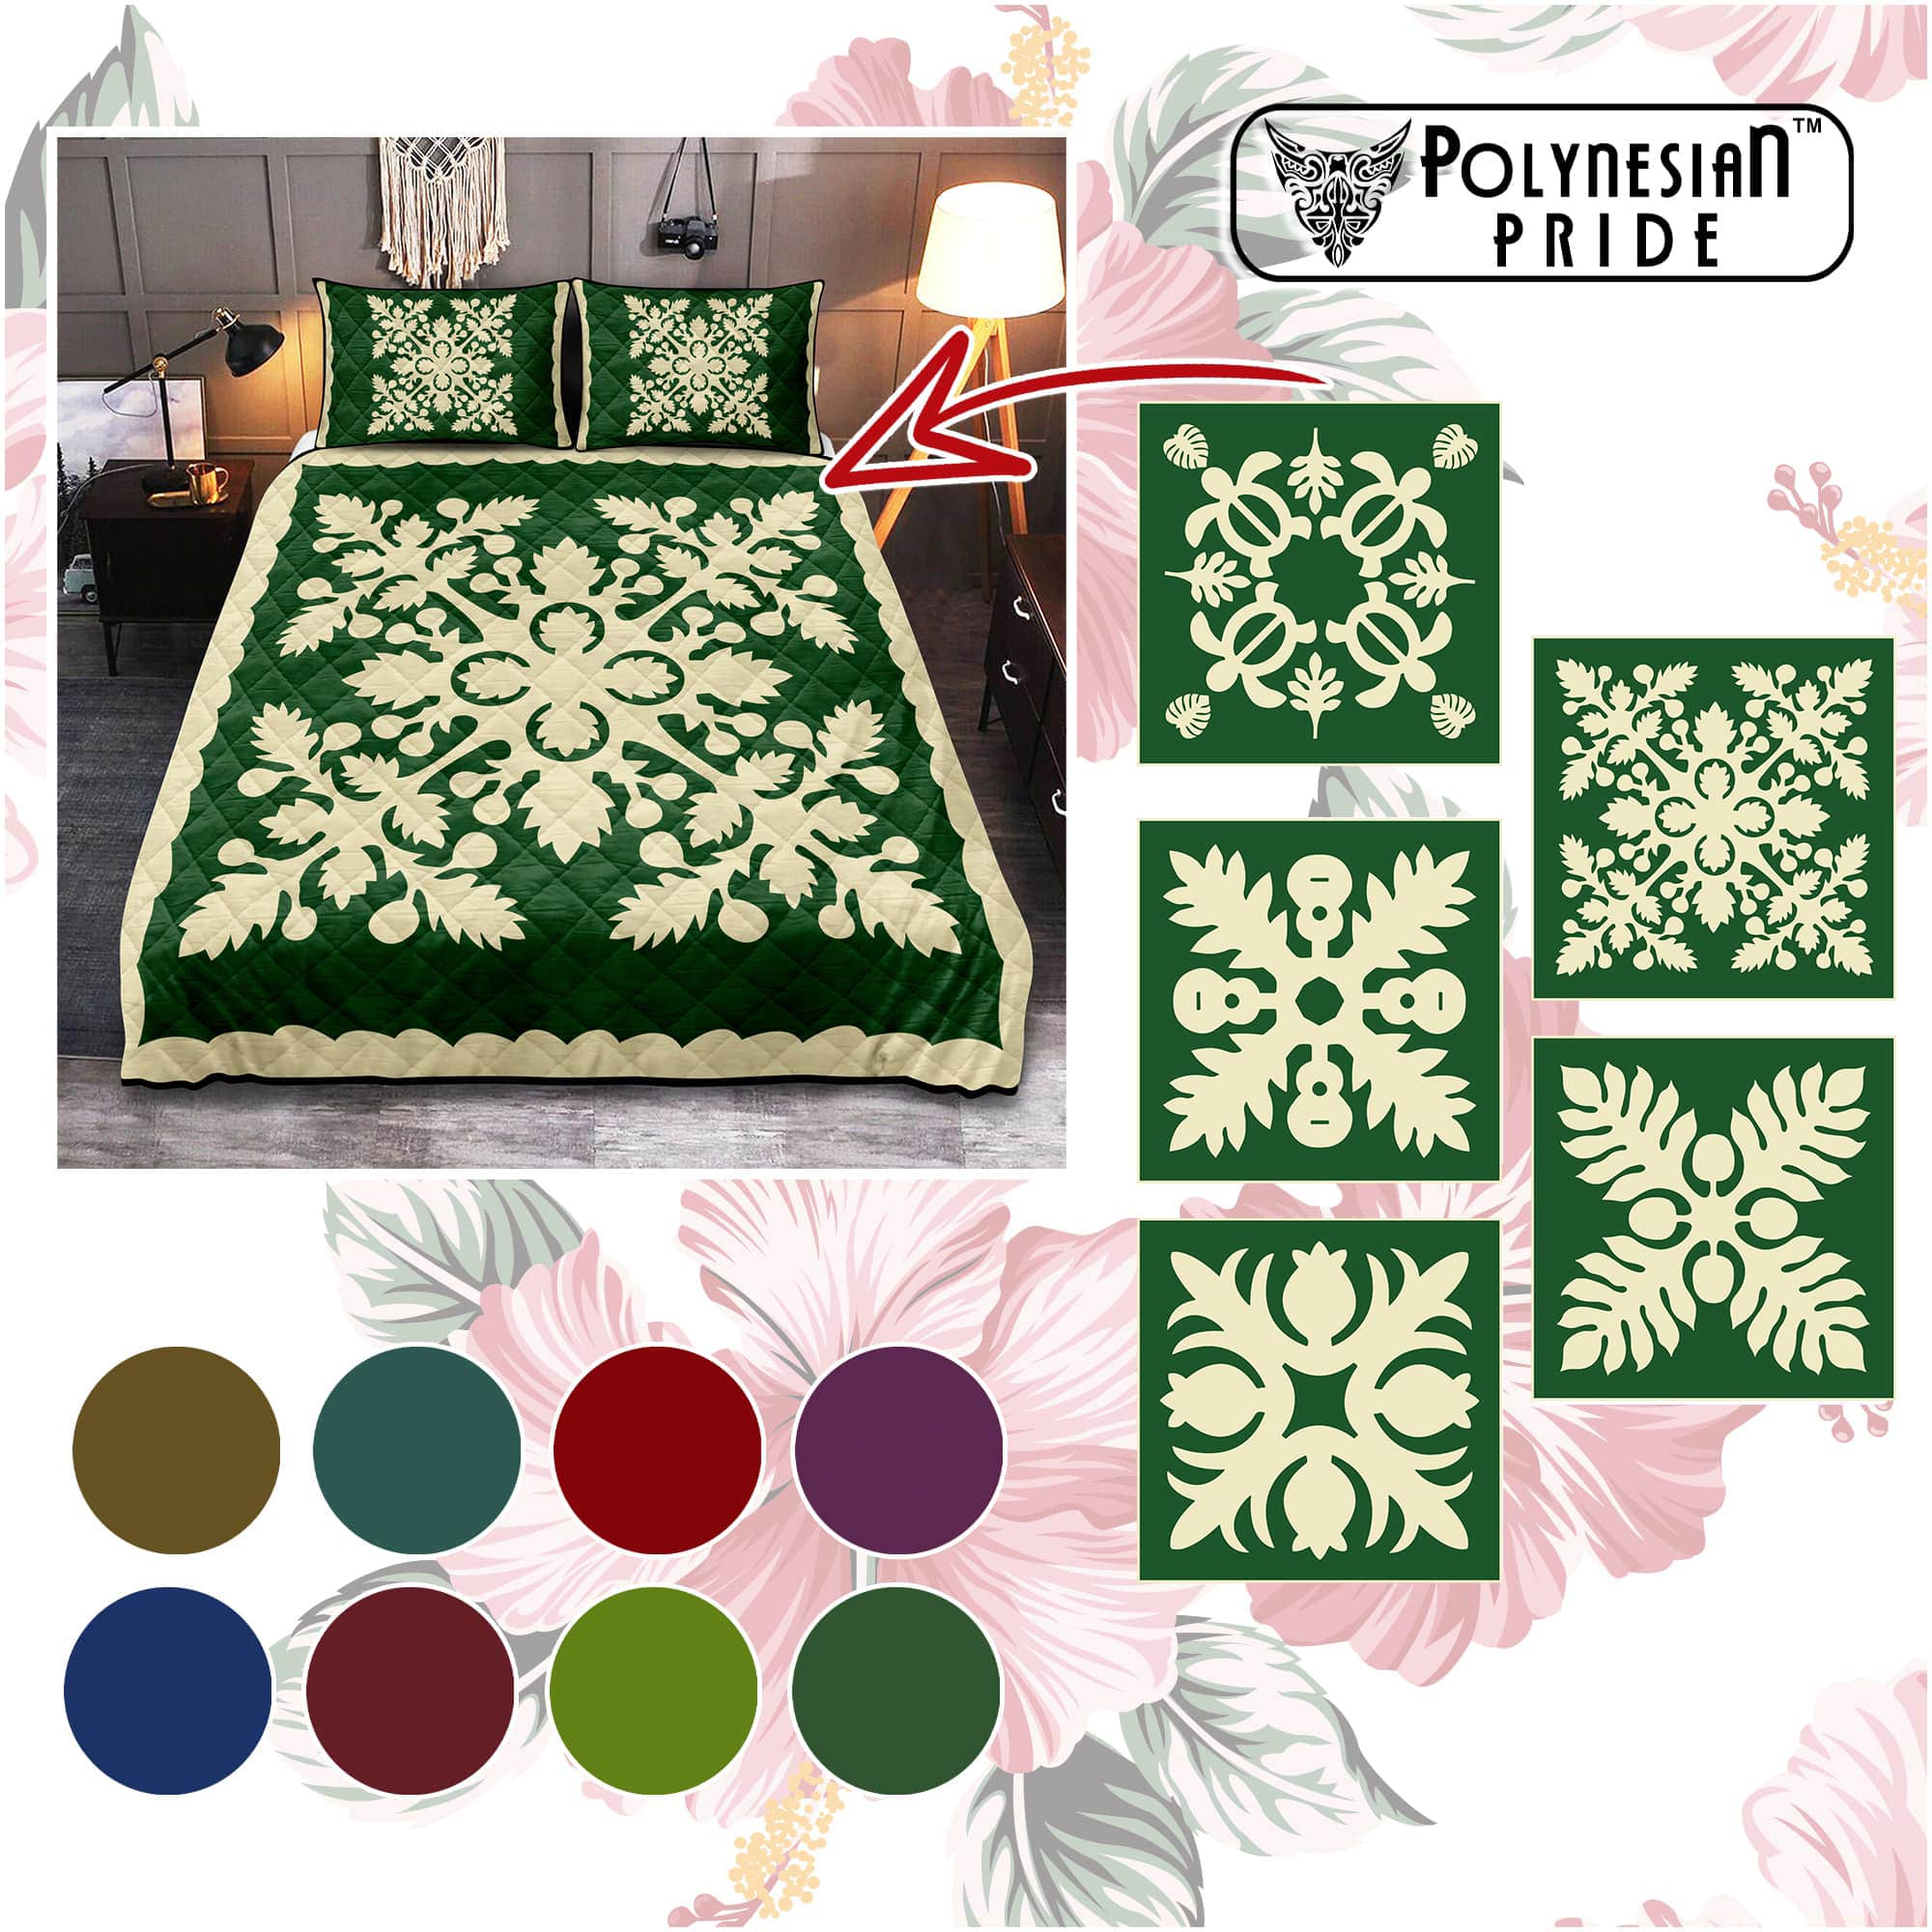 Custom Hawaii Quilt Pattern Quilt Bed Set Retro Tropical Vintage Style CTM14 - Polynesian Pride